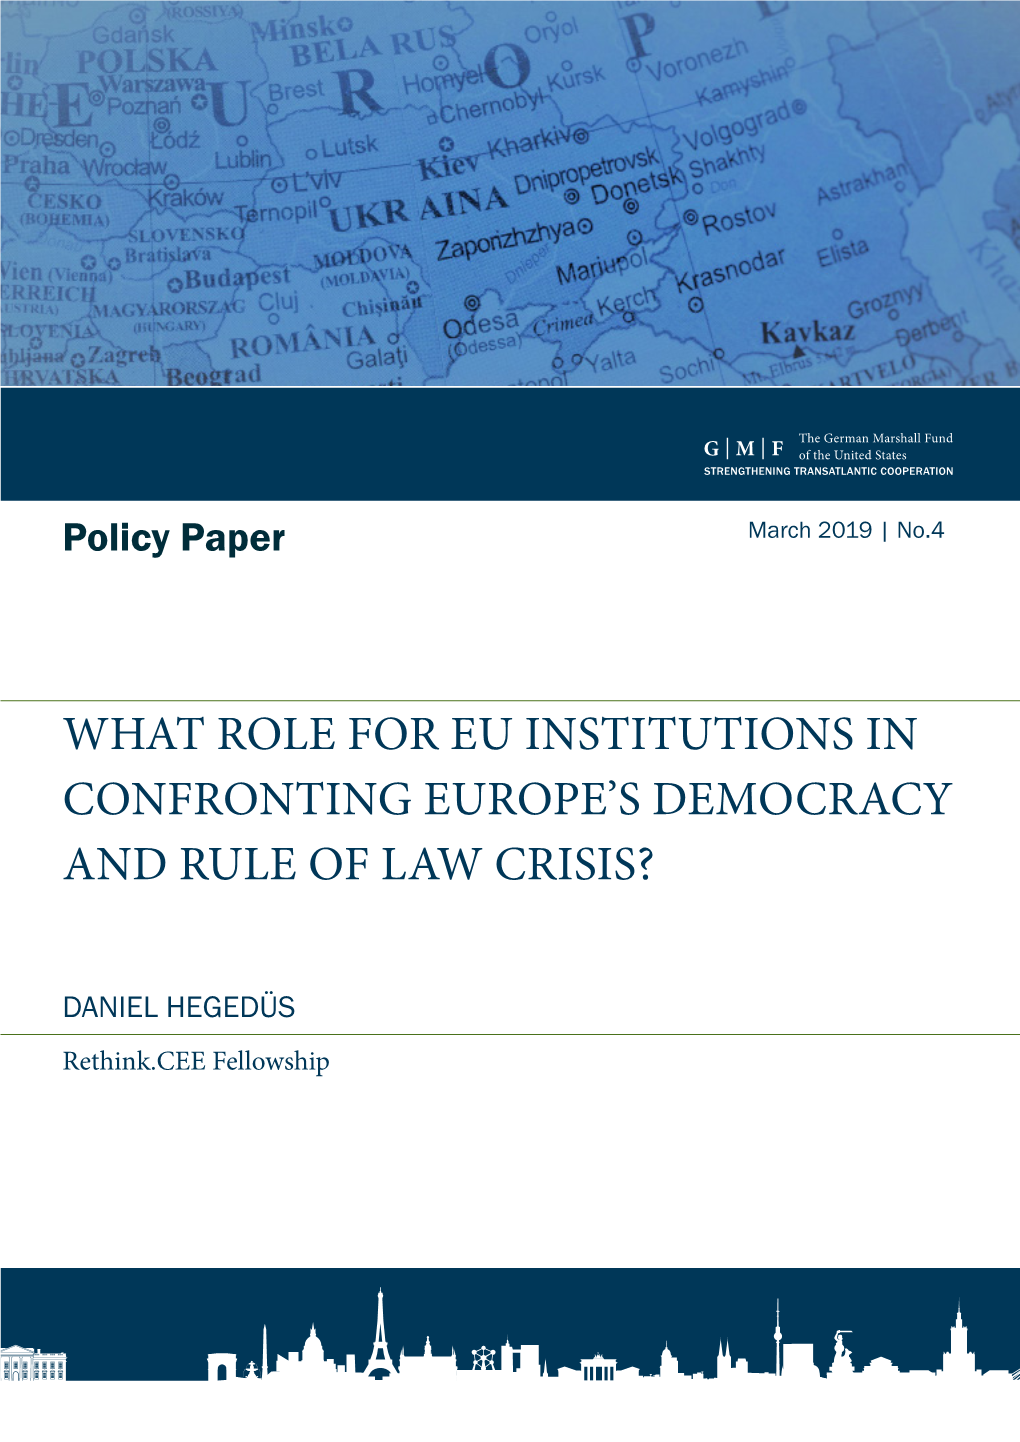 What Role for Eu Institutions in Confronting Europe's Democracy and Rule of Law Crisis?